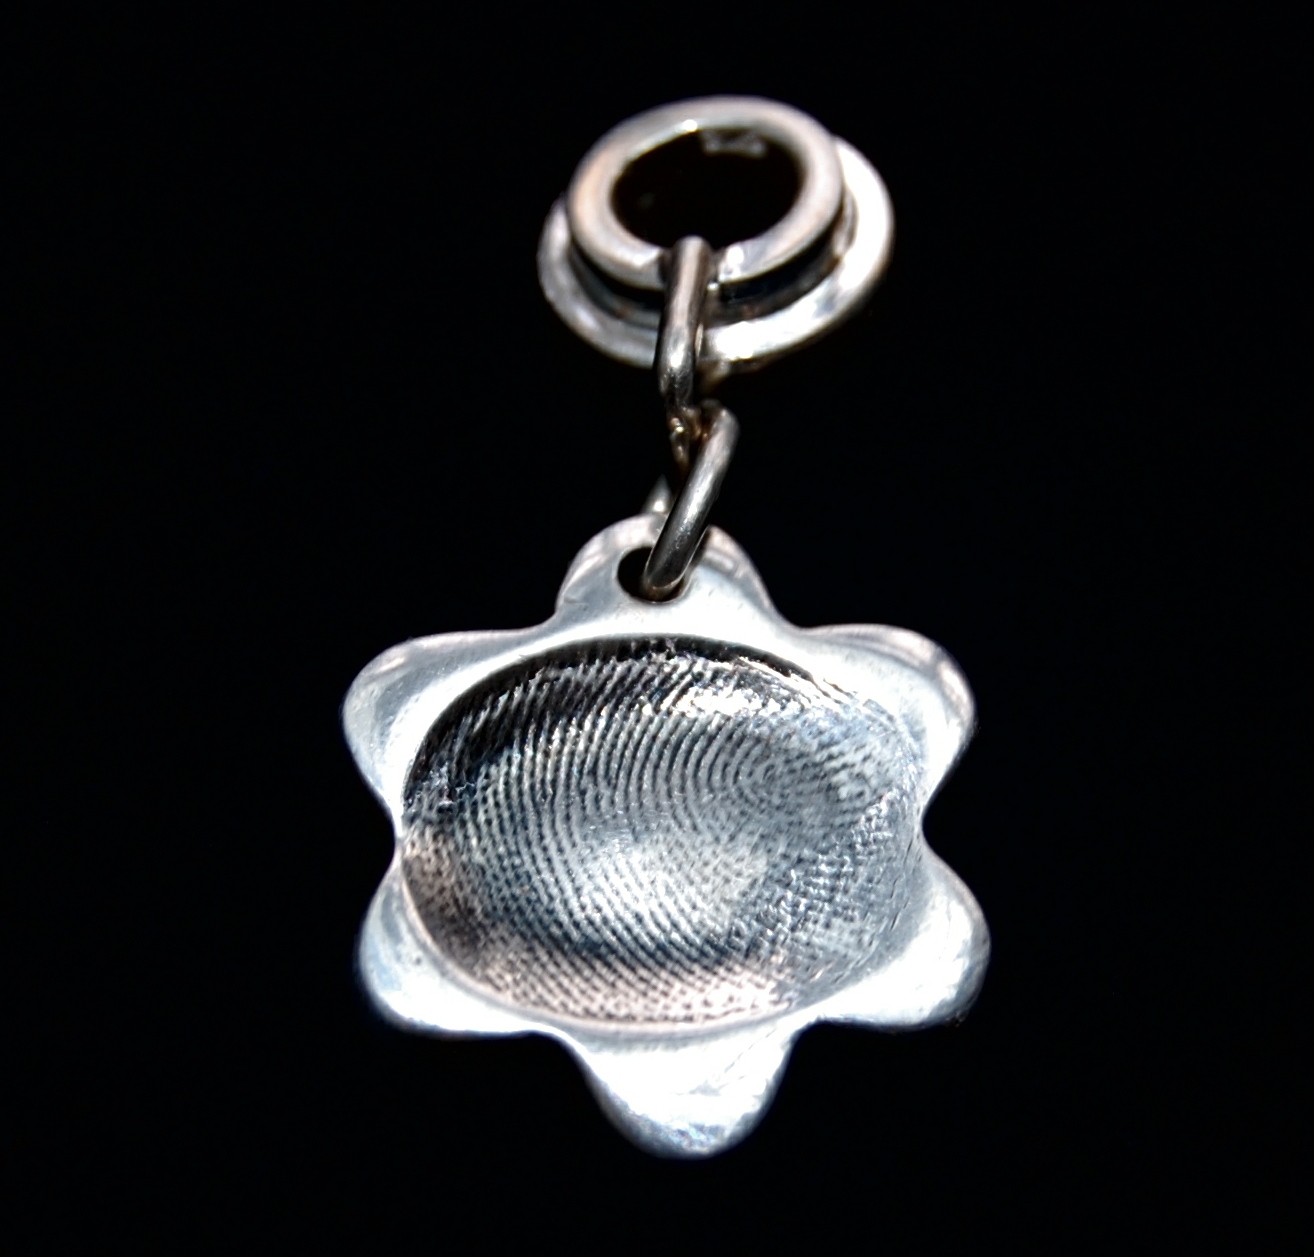 Small flower shaped silver fingerprint charm with name hand inscribed on the reverse. Charm secured attached to a charm carrier. Bracelets can be purchased separately.